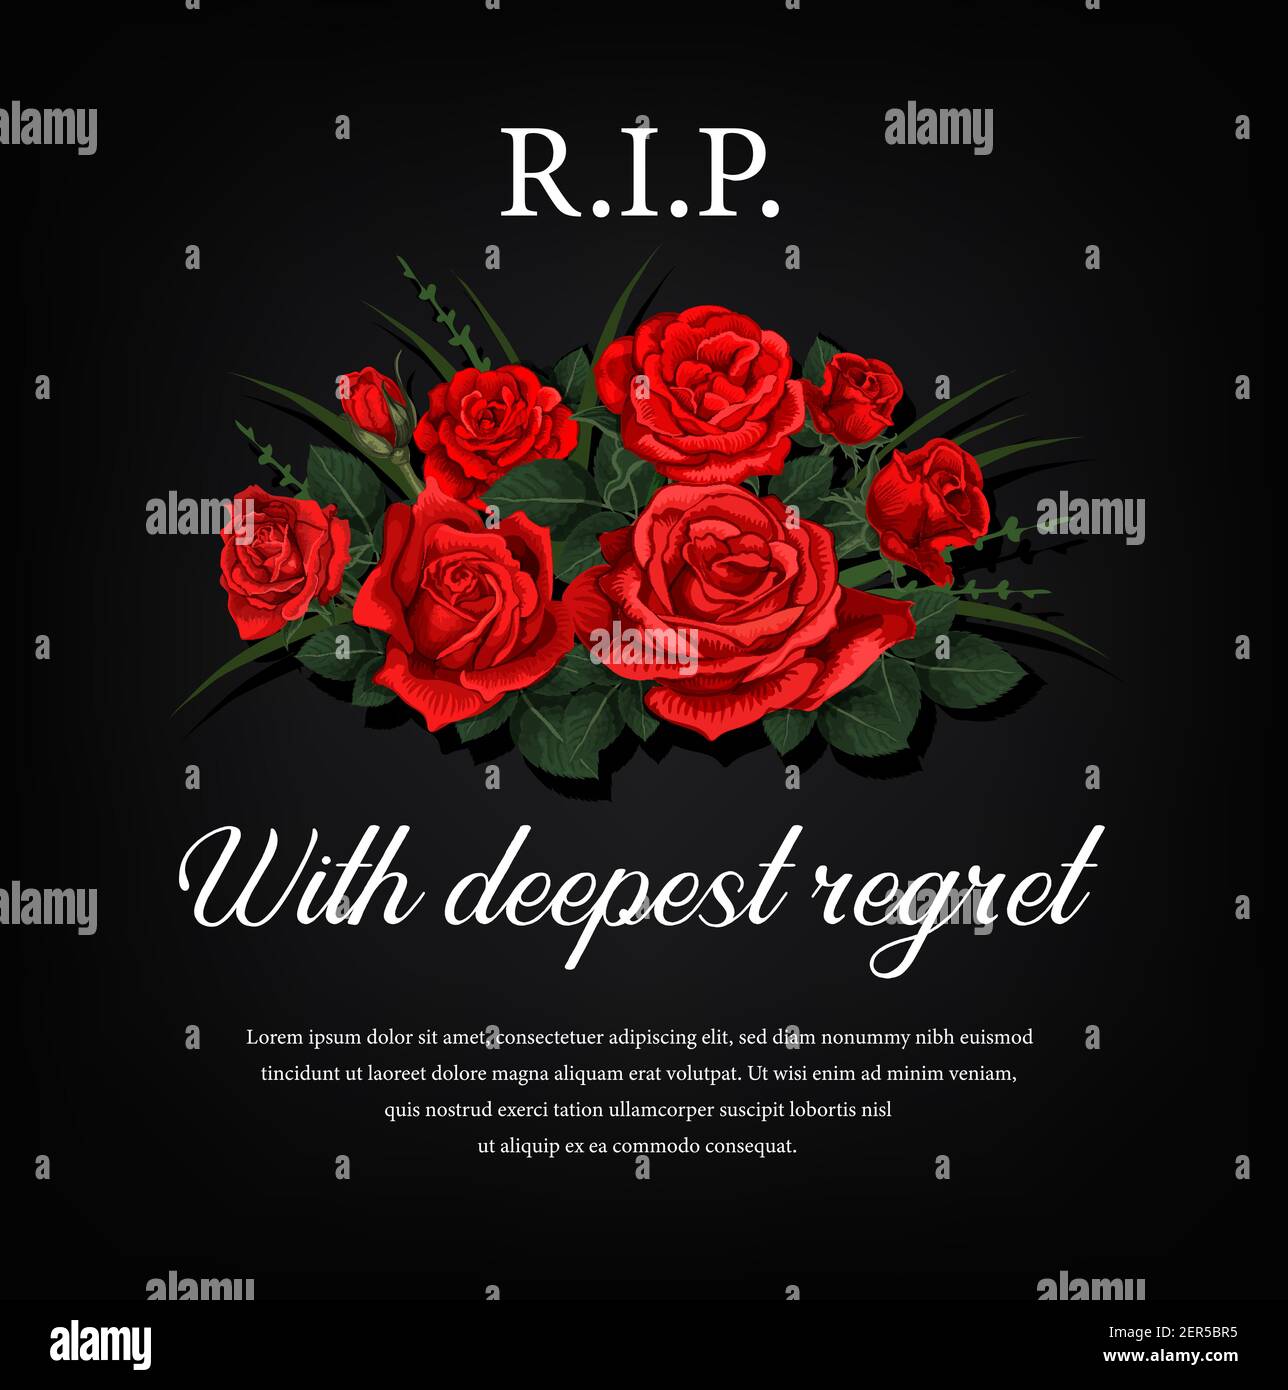 Rest Peace Floral Funeral Frame Rip Stock Vector (Royalty Free) 1938569944